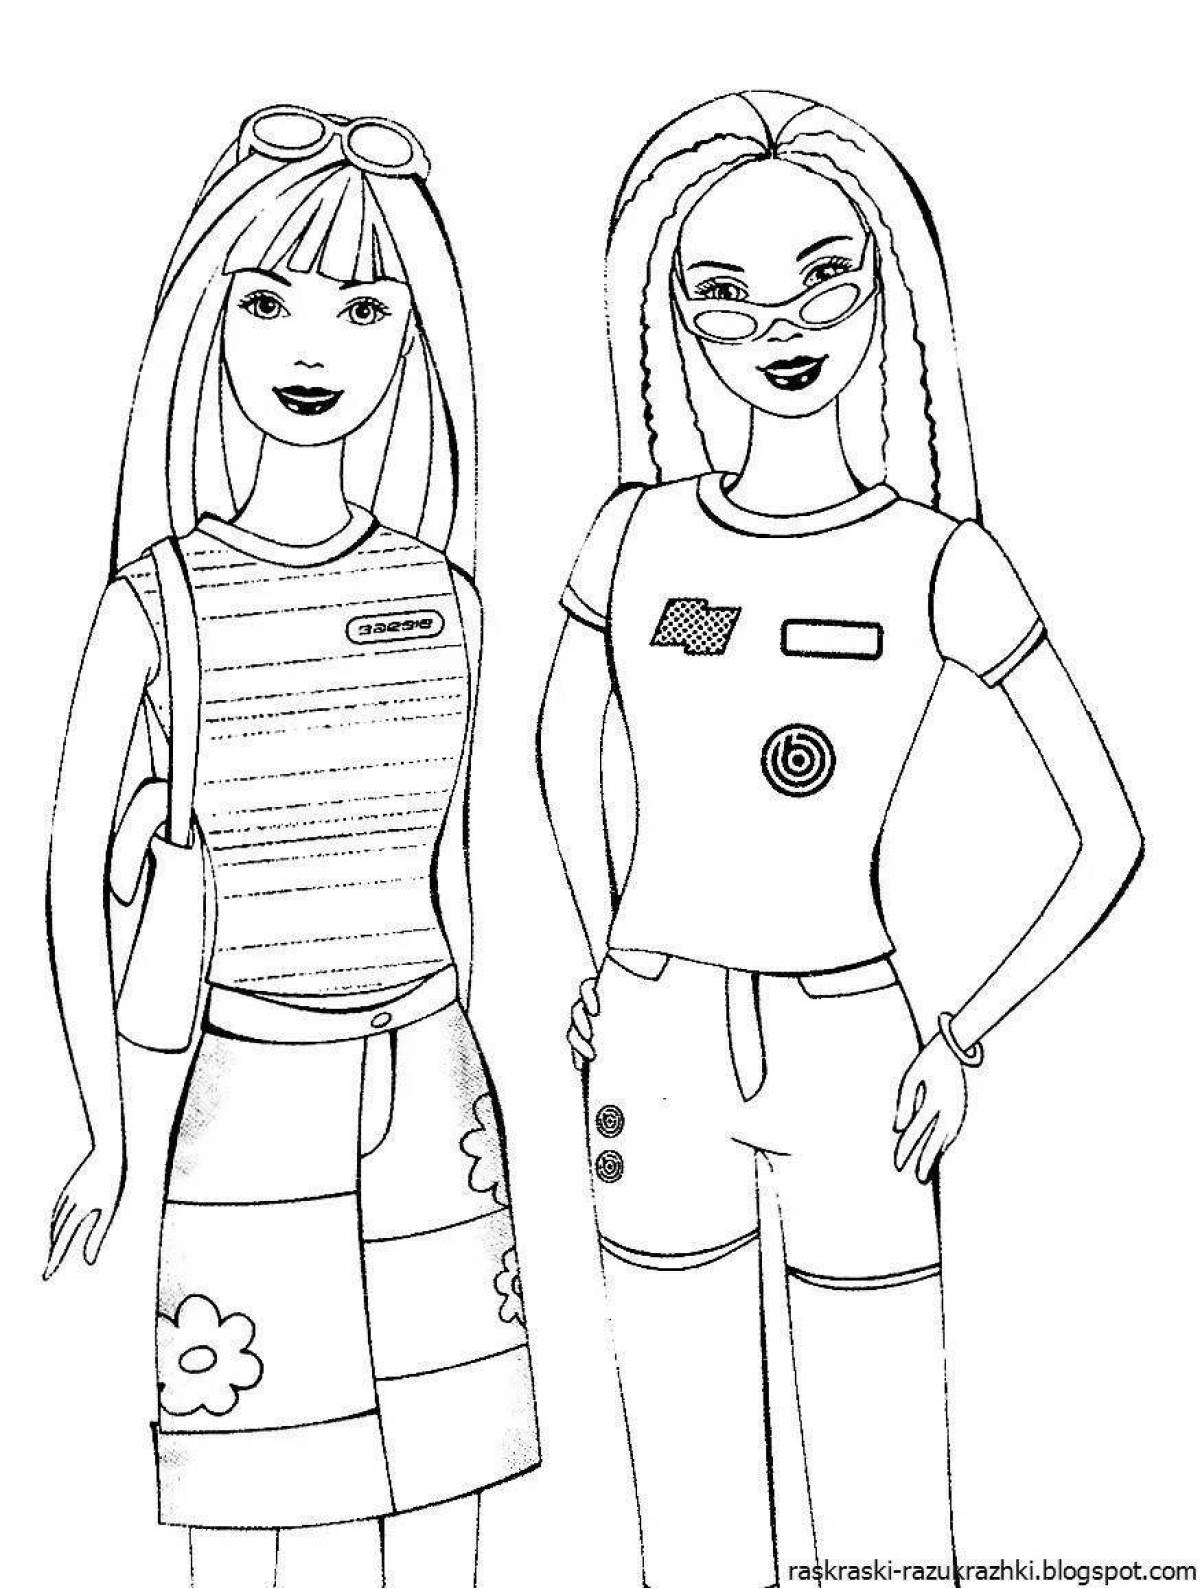 Elegant people coloring pages for girls